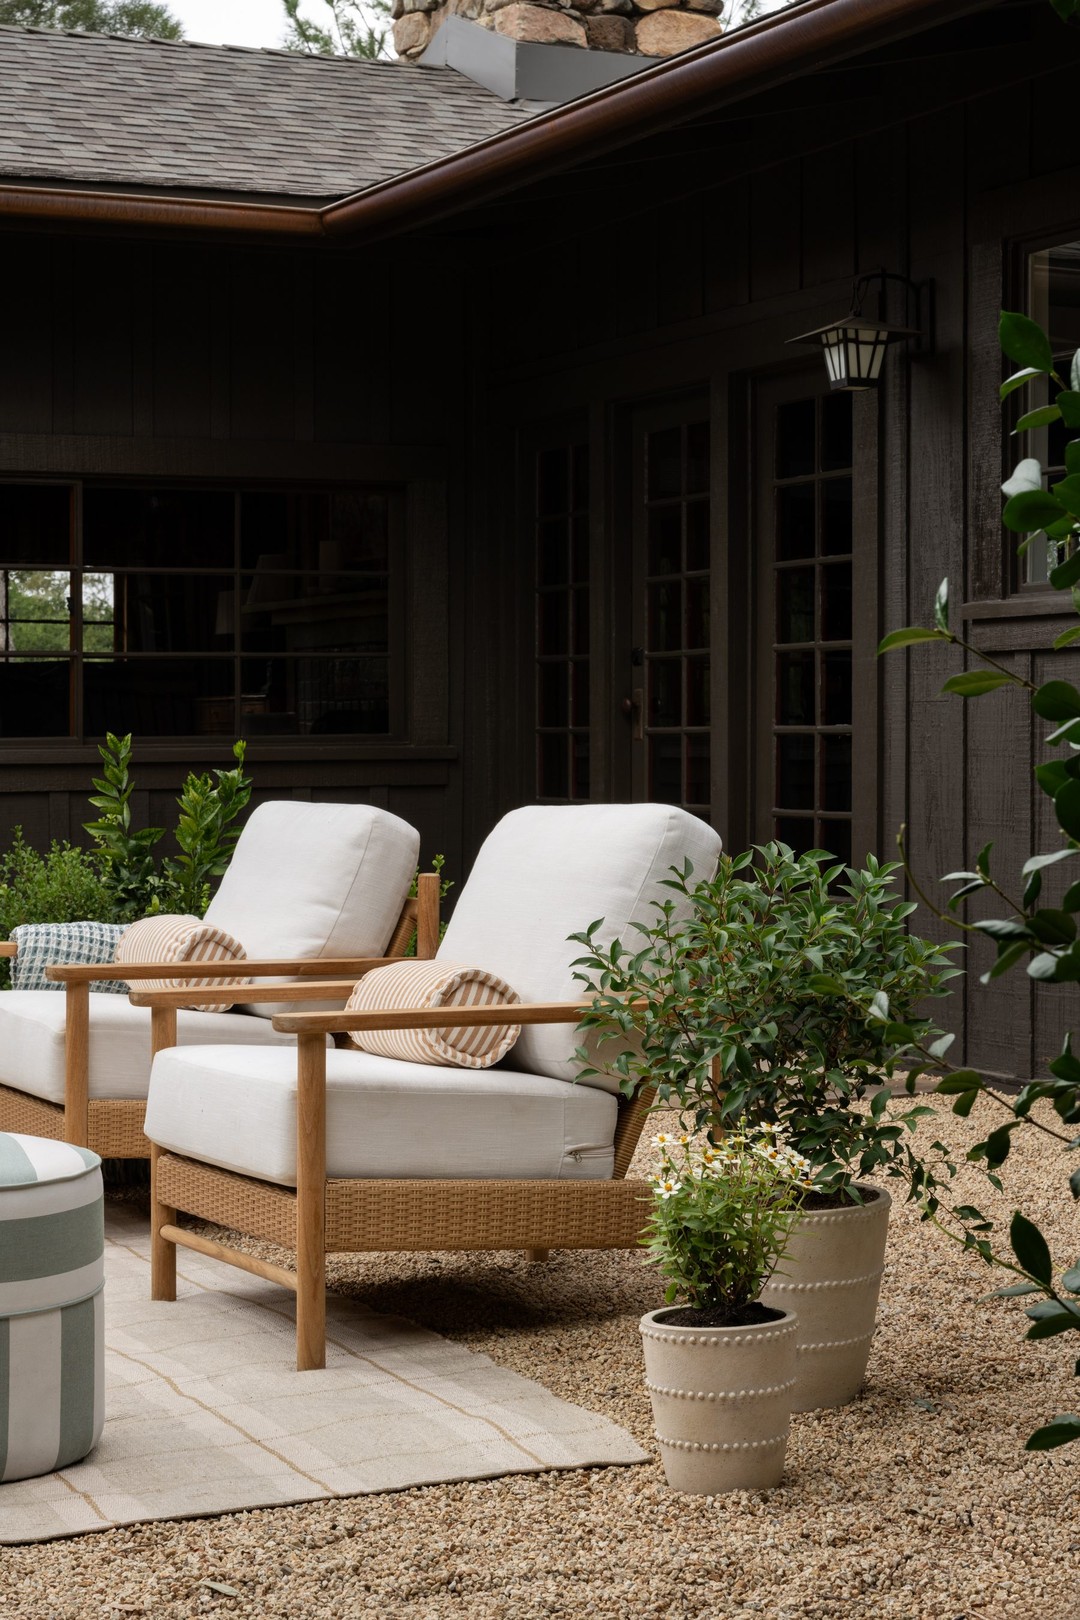 We're all about designing your outdoor space to be a mix of beauty and durability, and the Simeon Lounge Chair from @mcgeeandco is just that. It's 50% off right now during the Summer Tent Sale — snag it while you can! ☁️